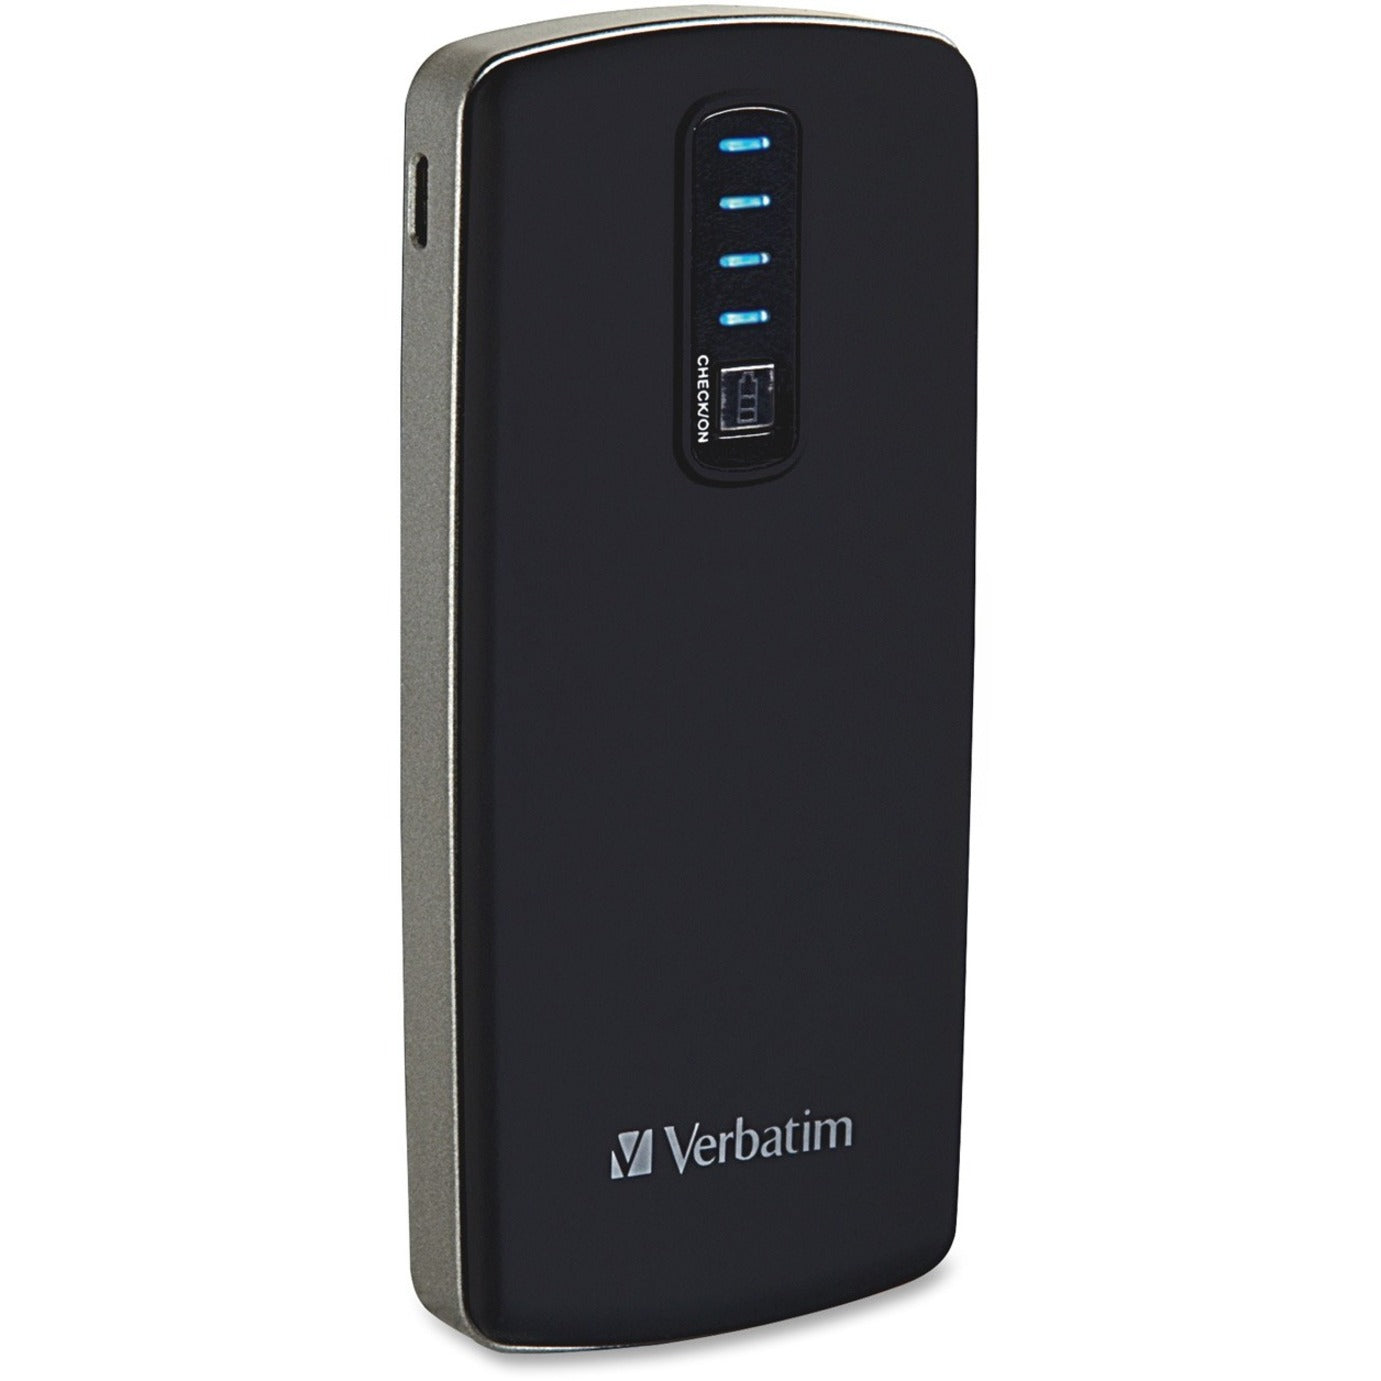 Verbatim 98019 Portable USB Power Pack Charger (3500 mAh), Black - Convenient Power on the Go